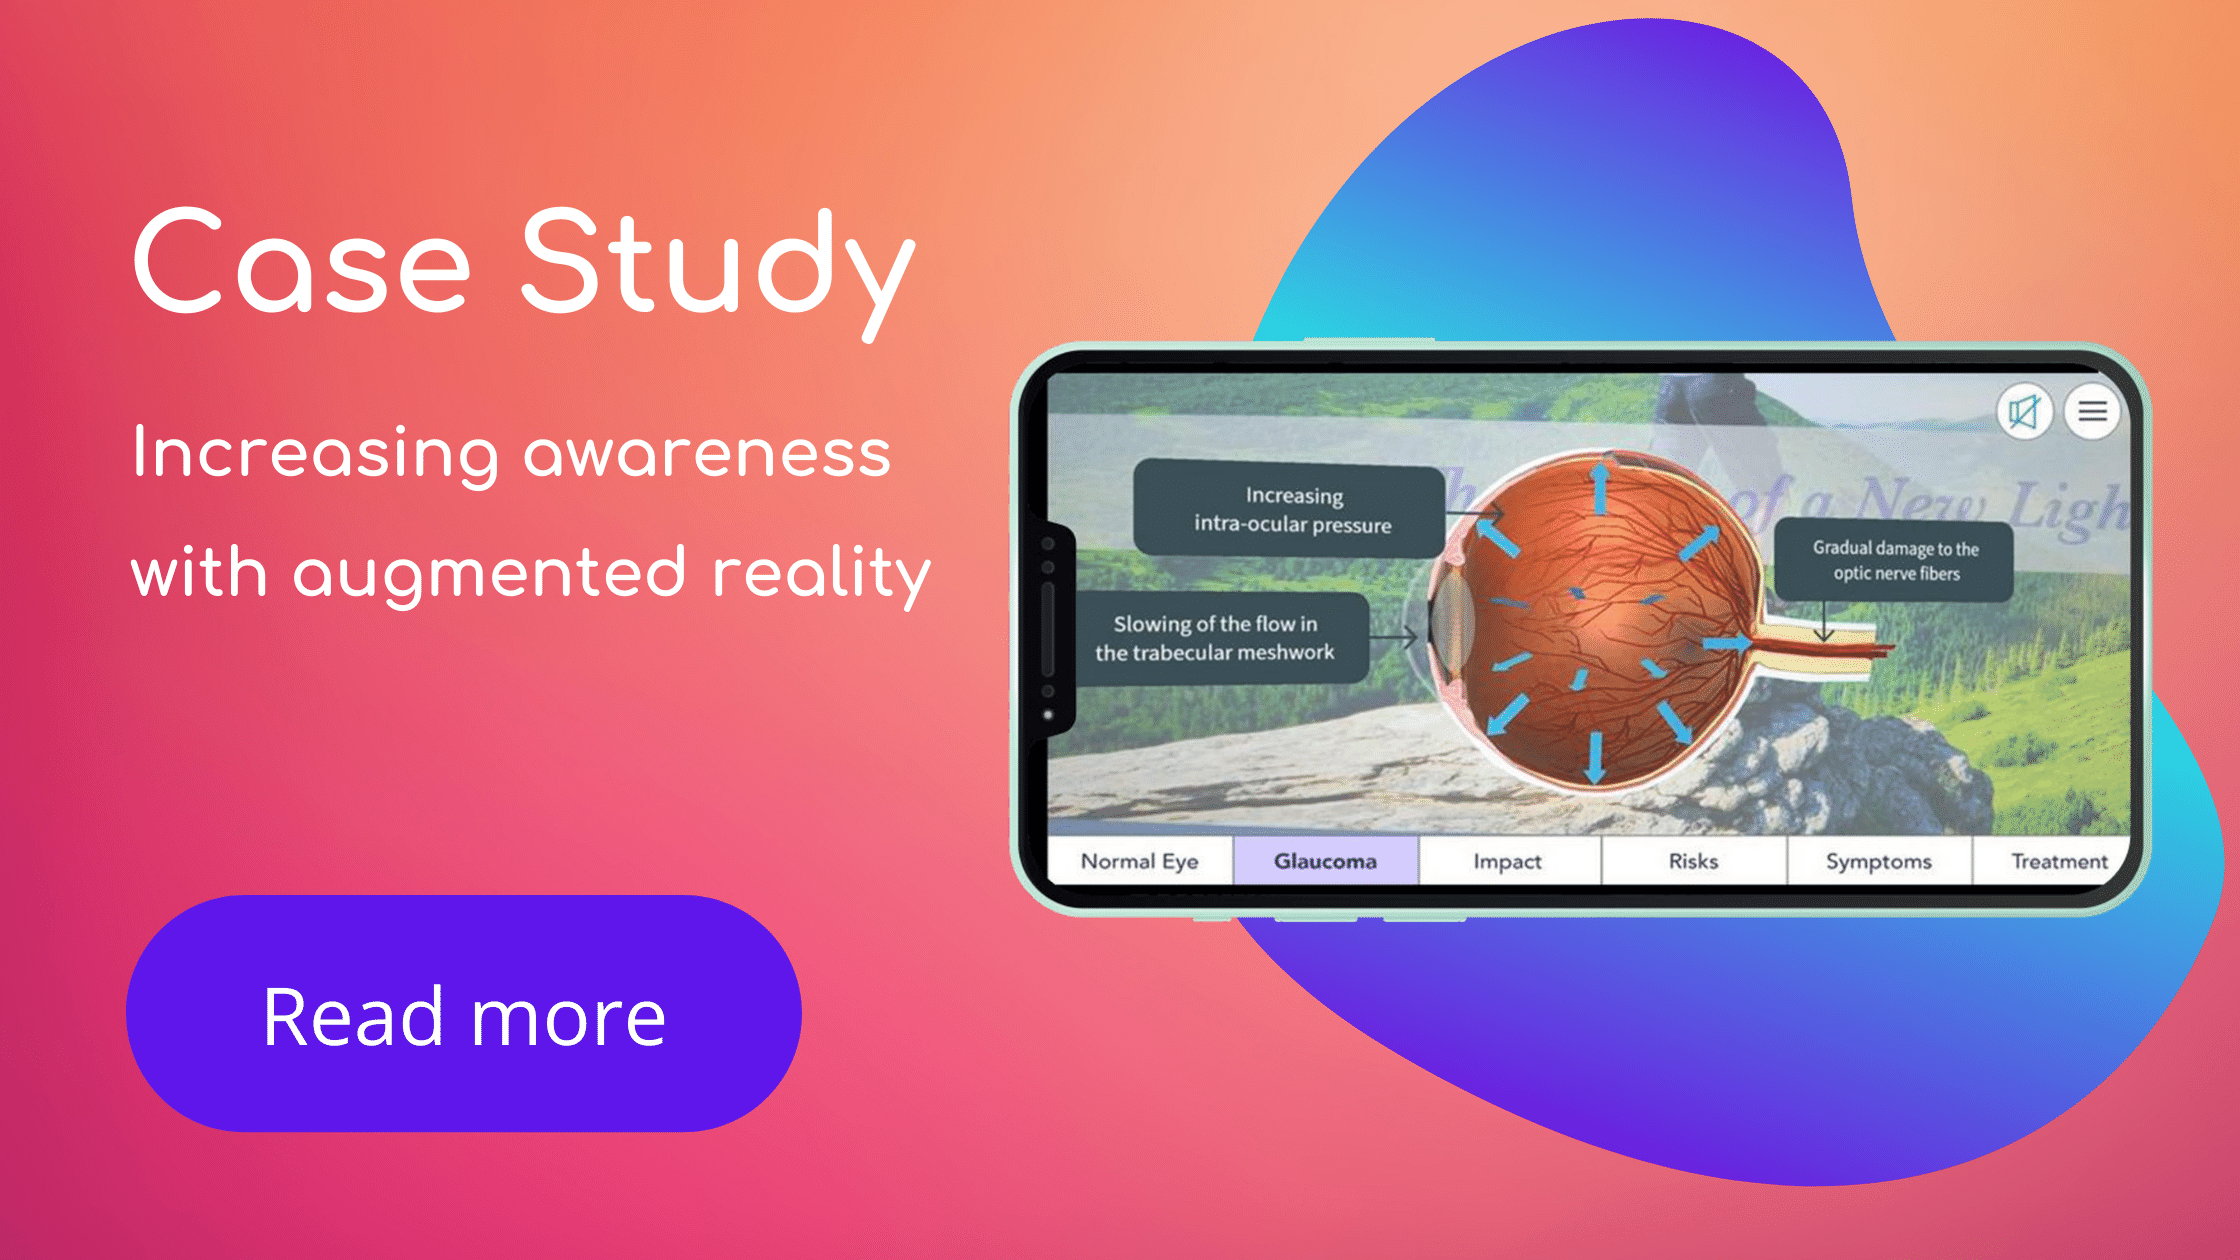 Increasing awareness with Augmented Reality